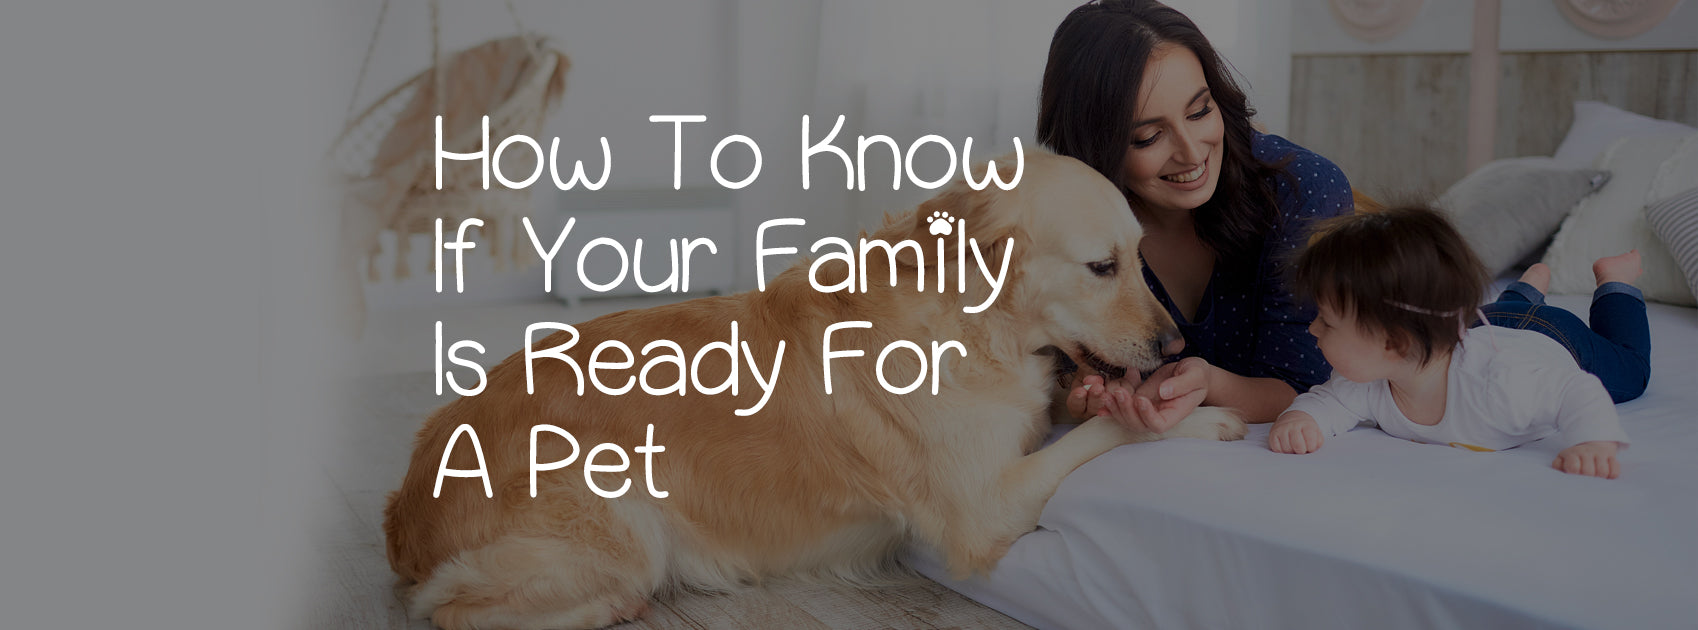 HOW TO KNOW IF YOUR FAMILY IS READY FOR A PET?